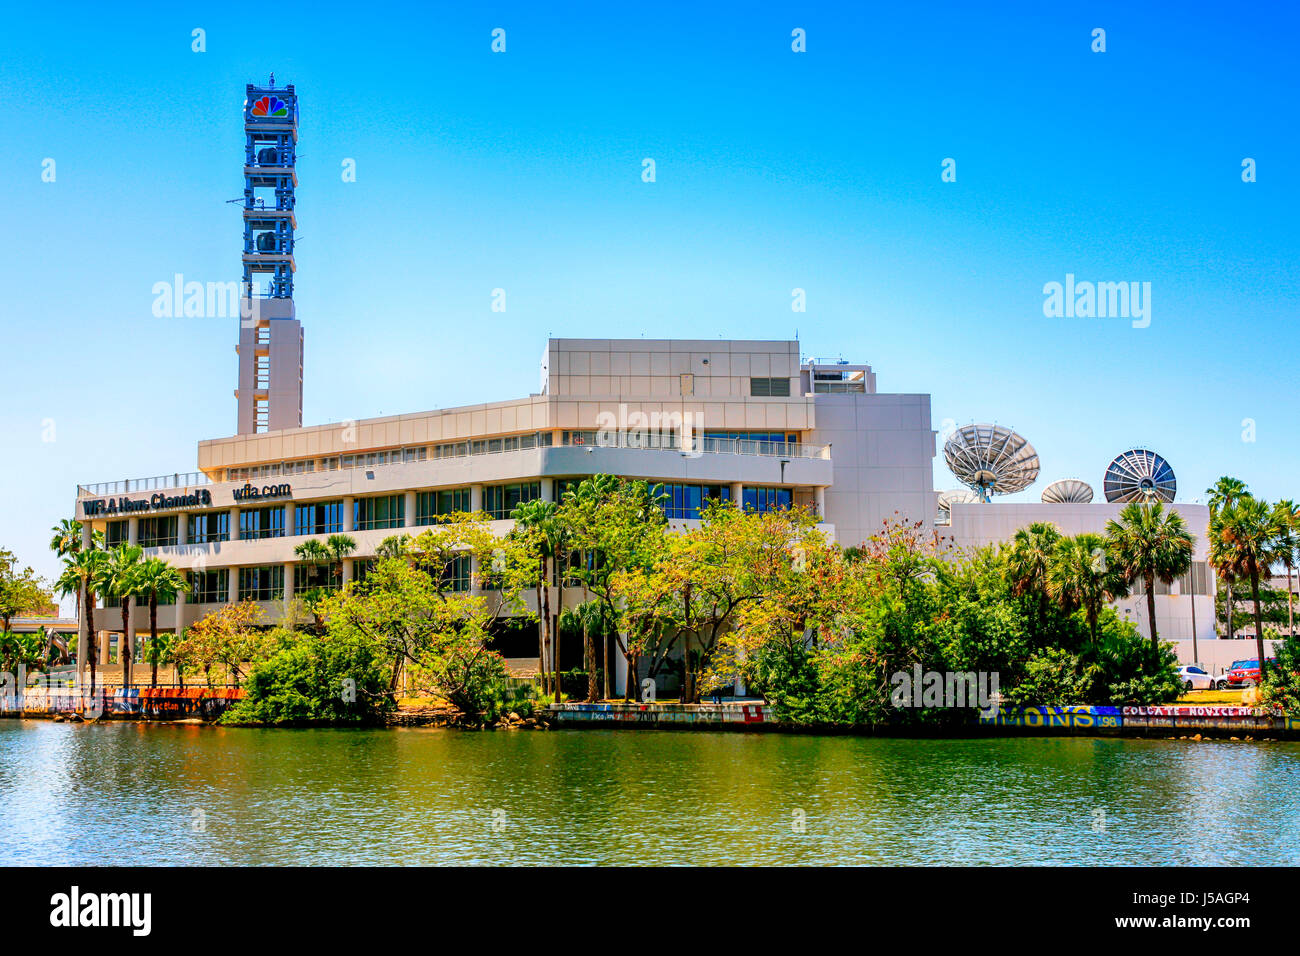 The WFLA News Channel 8 building on the Hillsboro River in downtown Tampa, FL Stock Photo